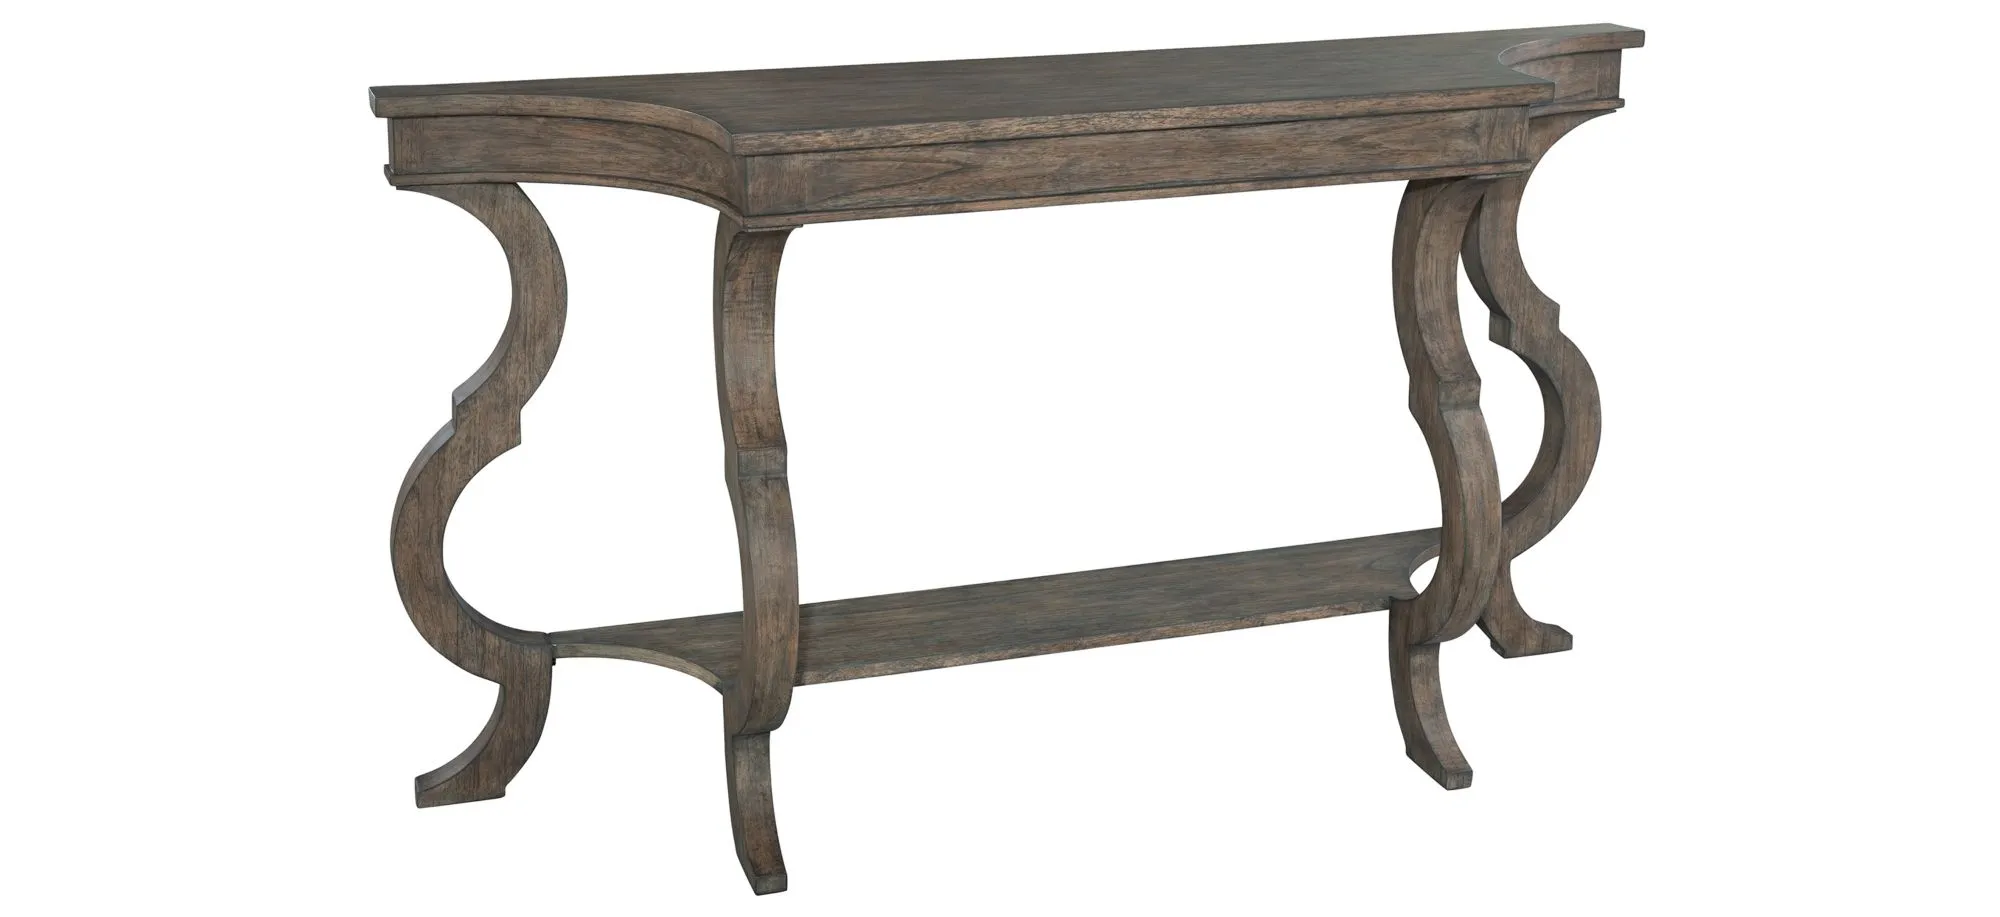 Lincoln Park Sofa Table in LOLN PARK by Hekman Furniture Company